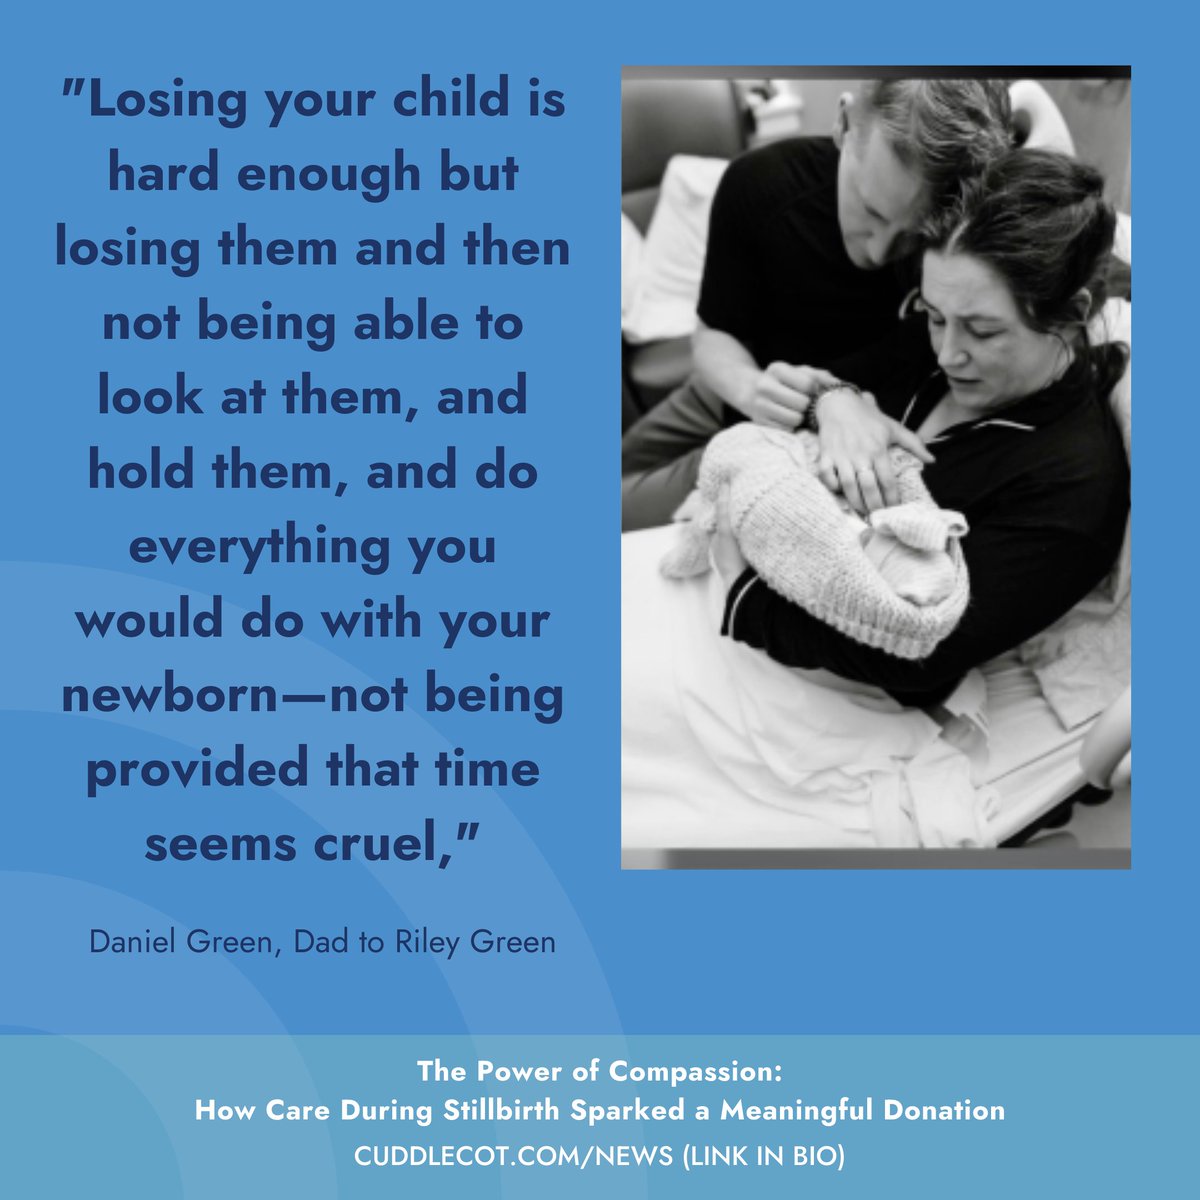 💙 A Fathers Perspective and the Power of Compassion: How Compassionate Care Sparked a Meaningful Donation 
➡ To read the full story visit: cuddlecot.com/a-legacy-of-lo…
#CompassionateCare #BereavementSupport #GrievingFamilies #CuddleCot #BabyLoss #StillbirthSupport #InfantLoss